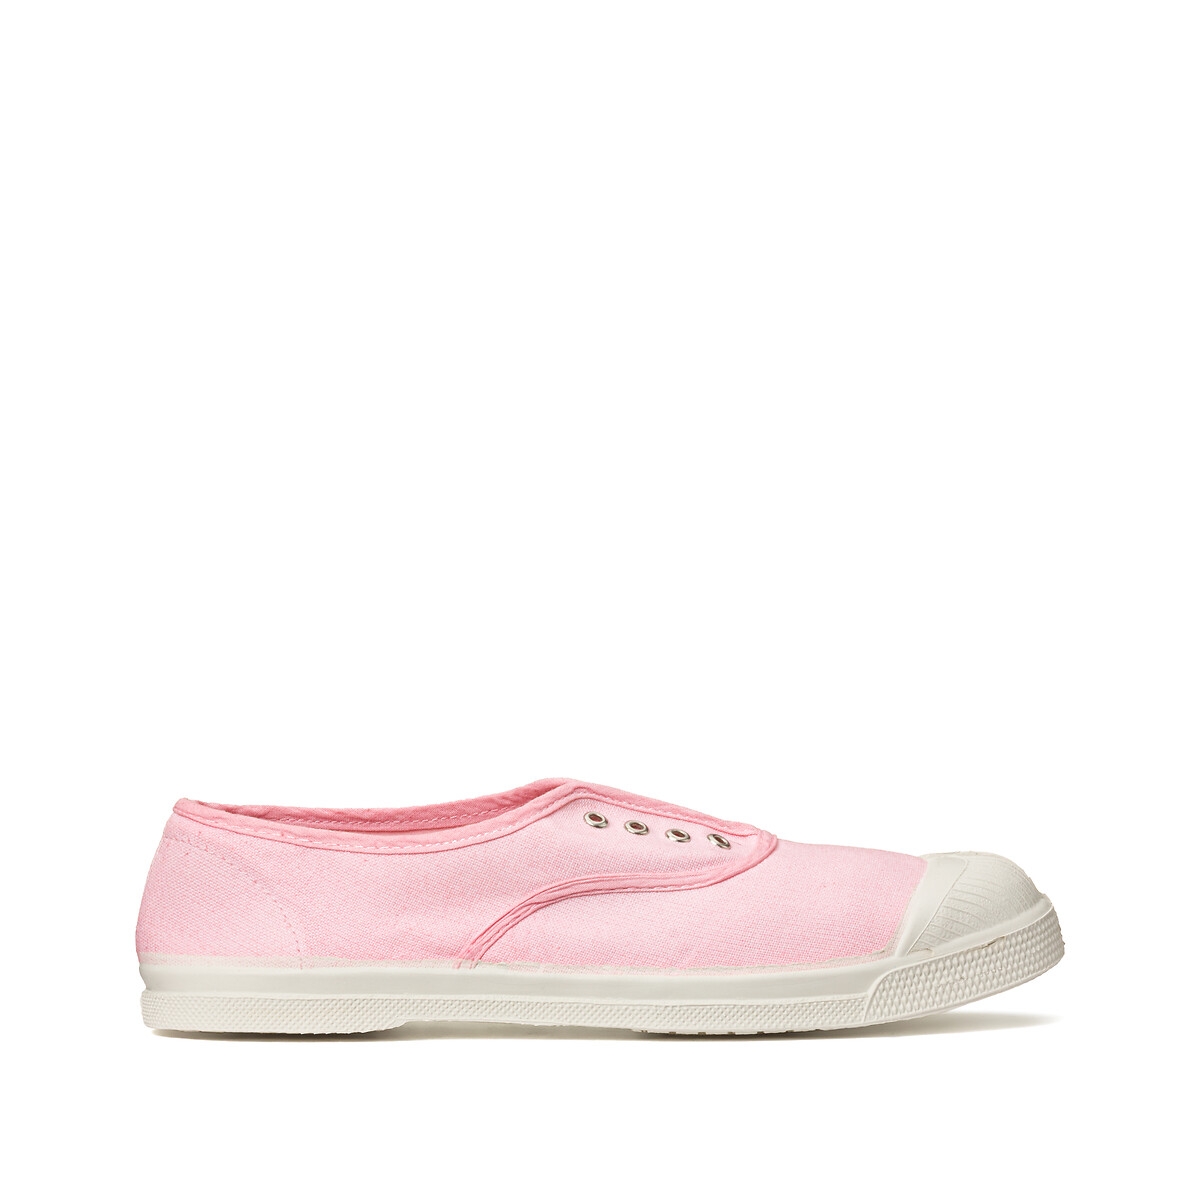 Bensimon Elly Canvas Trainers | Rather Saucy